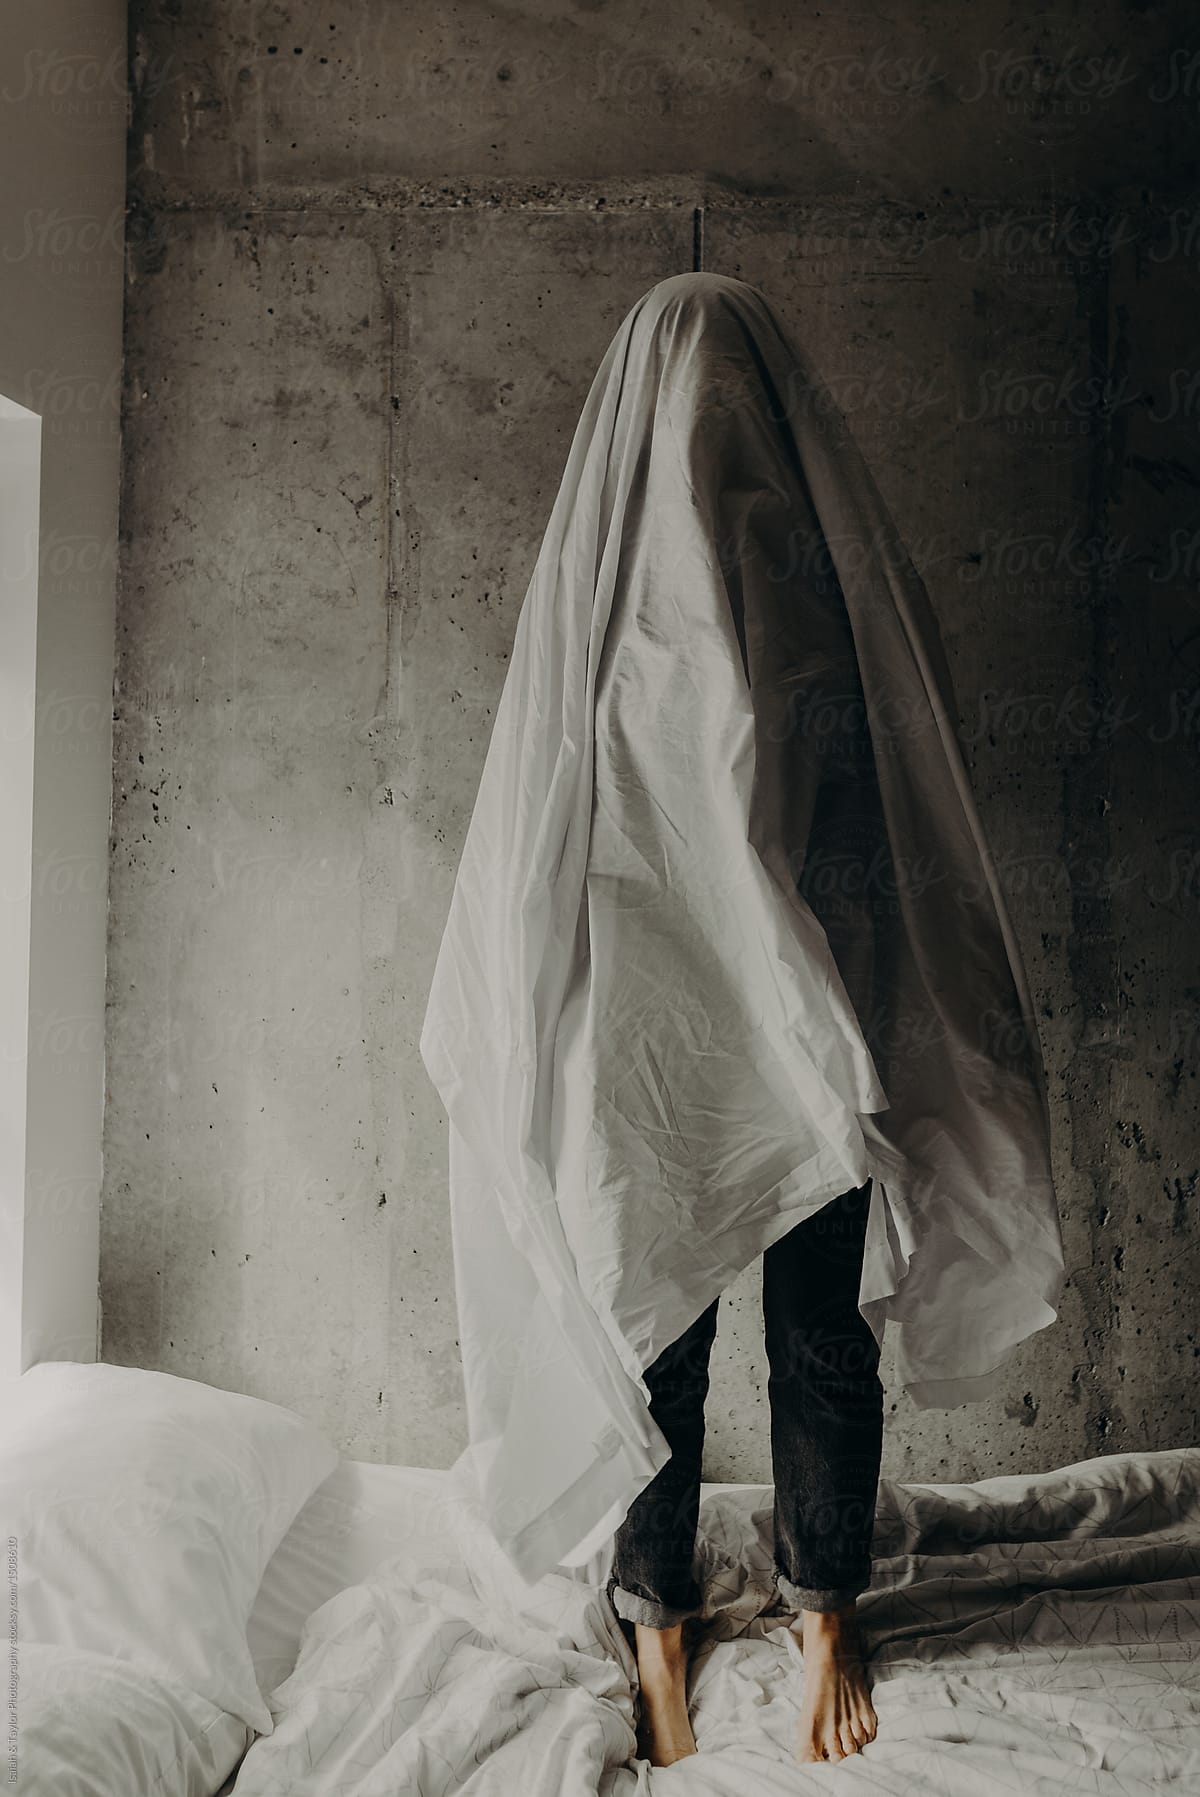 A Sad Ghost Standing Alone On A Messy Bed In A Cement Loft Bedroom By 